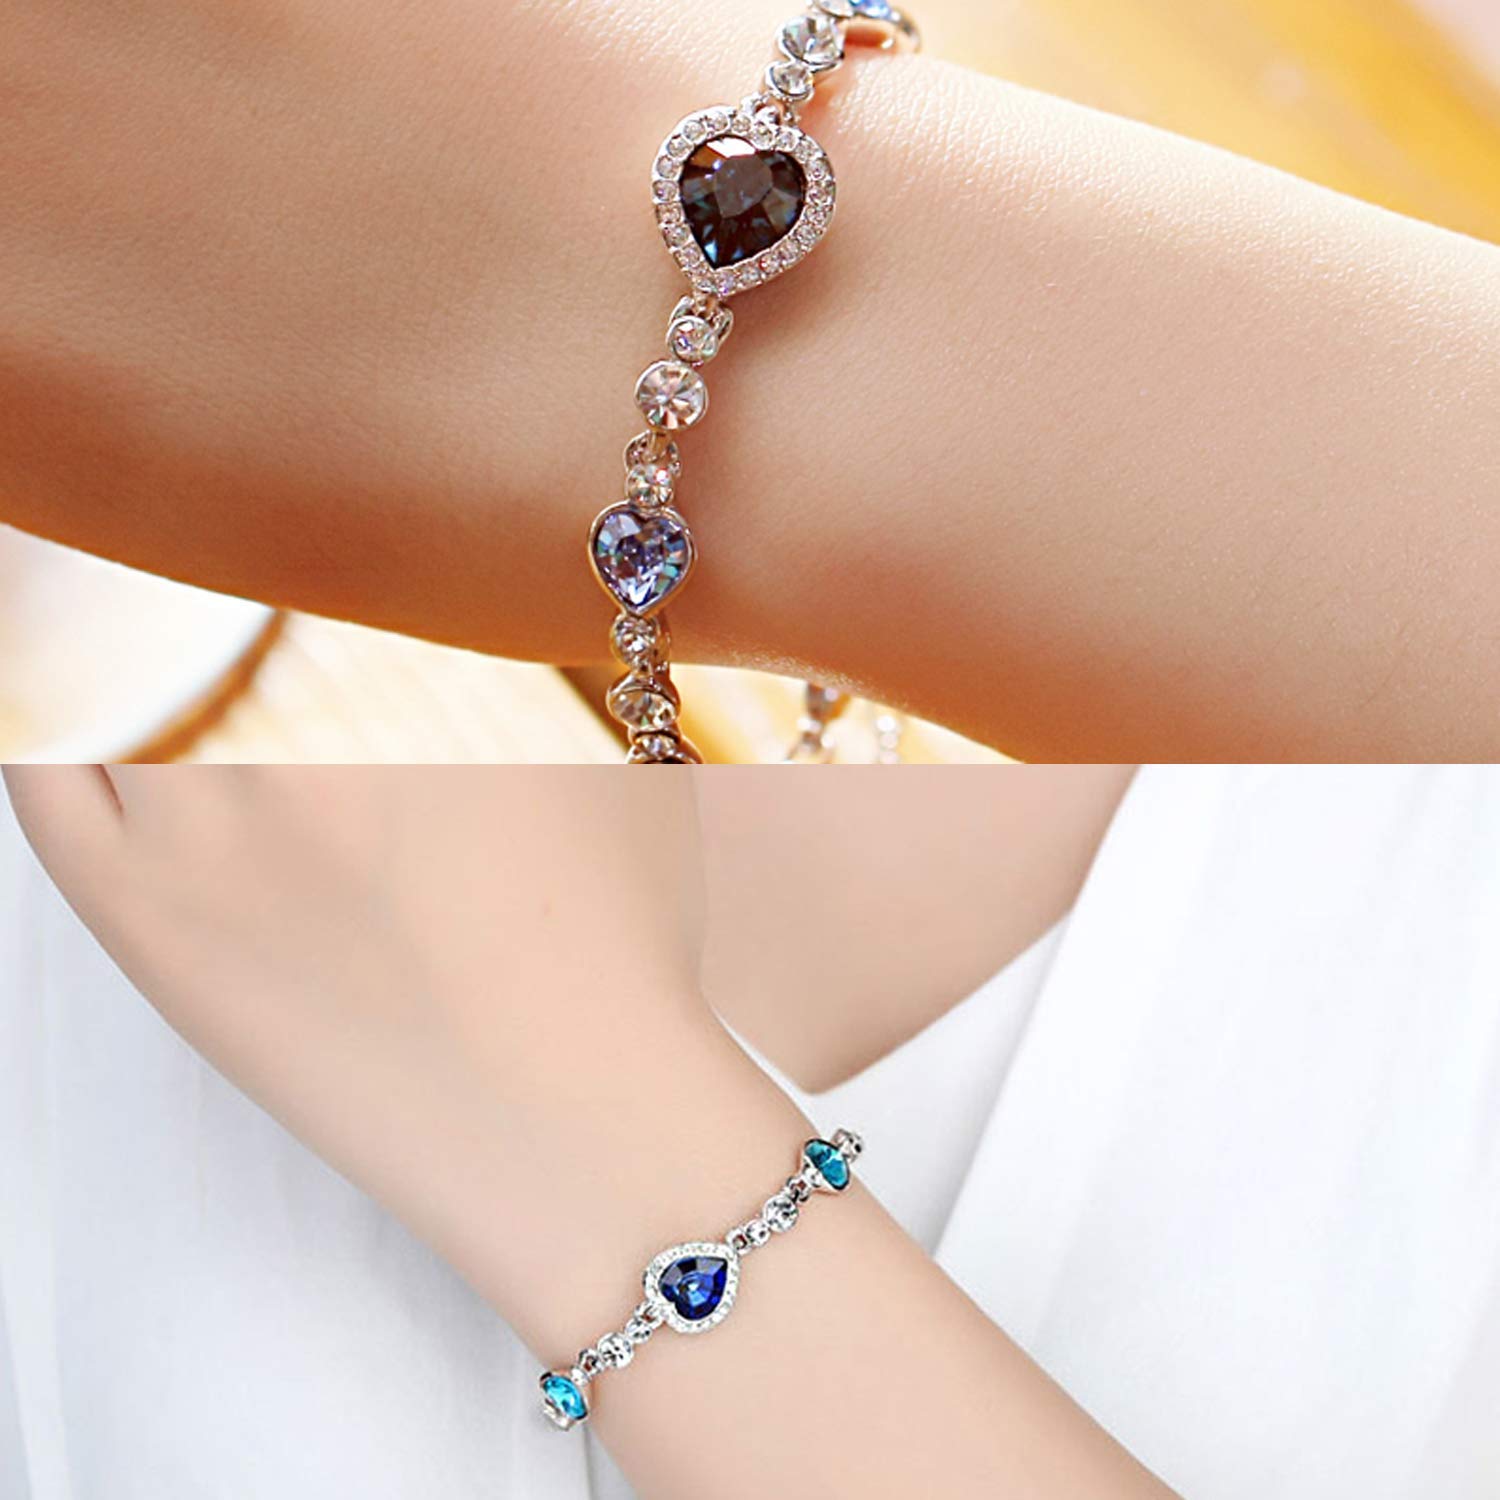 Yellow Chimes Valentine Gift for Girls Bracelet for Women and Girls | Fashion Blue and White Crystal Bracelets for Women and Girls | Heart Shaped Silver Toned Bracelet | Accessories Jewellery for Women | Birthday Gift for Girls and Women Anniversary Gift